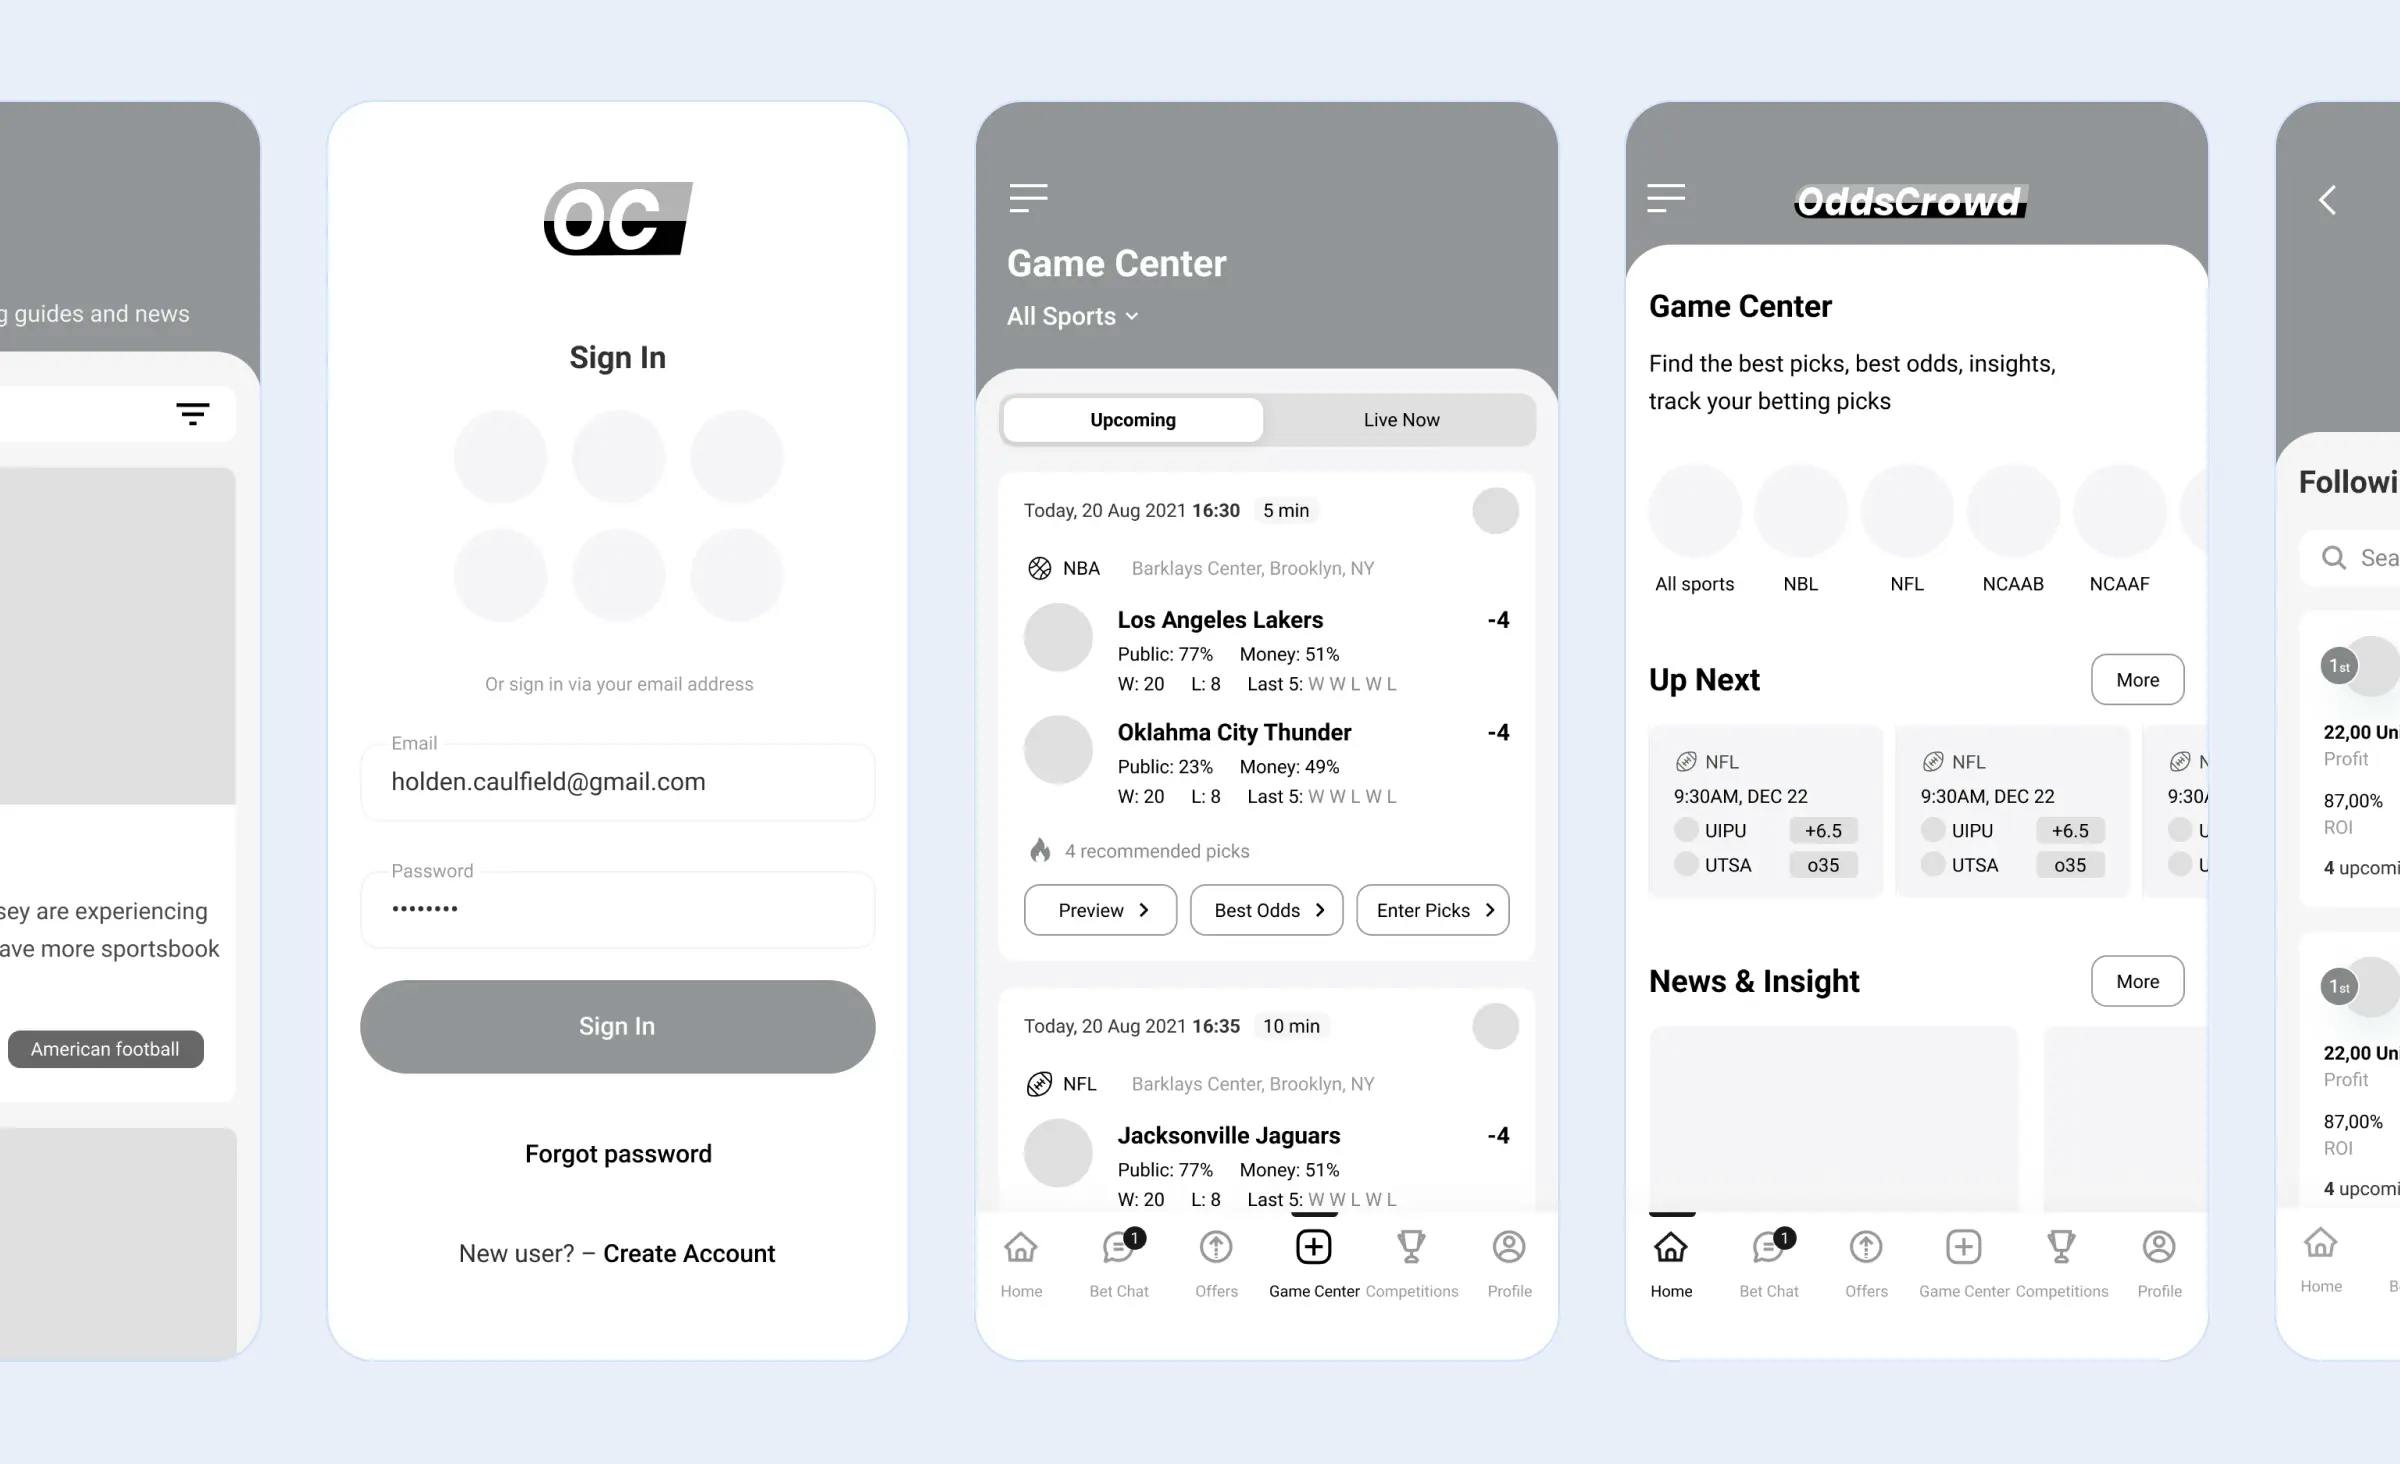 The image depicts the wireframes of the OddsCrowd entertainment software, created during the process of UI/UX design for the interfaces. Visible are the wireframes for the sign-in page, the game center, and the main page.